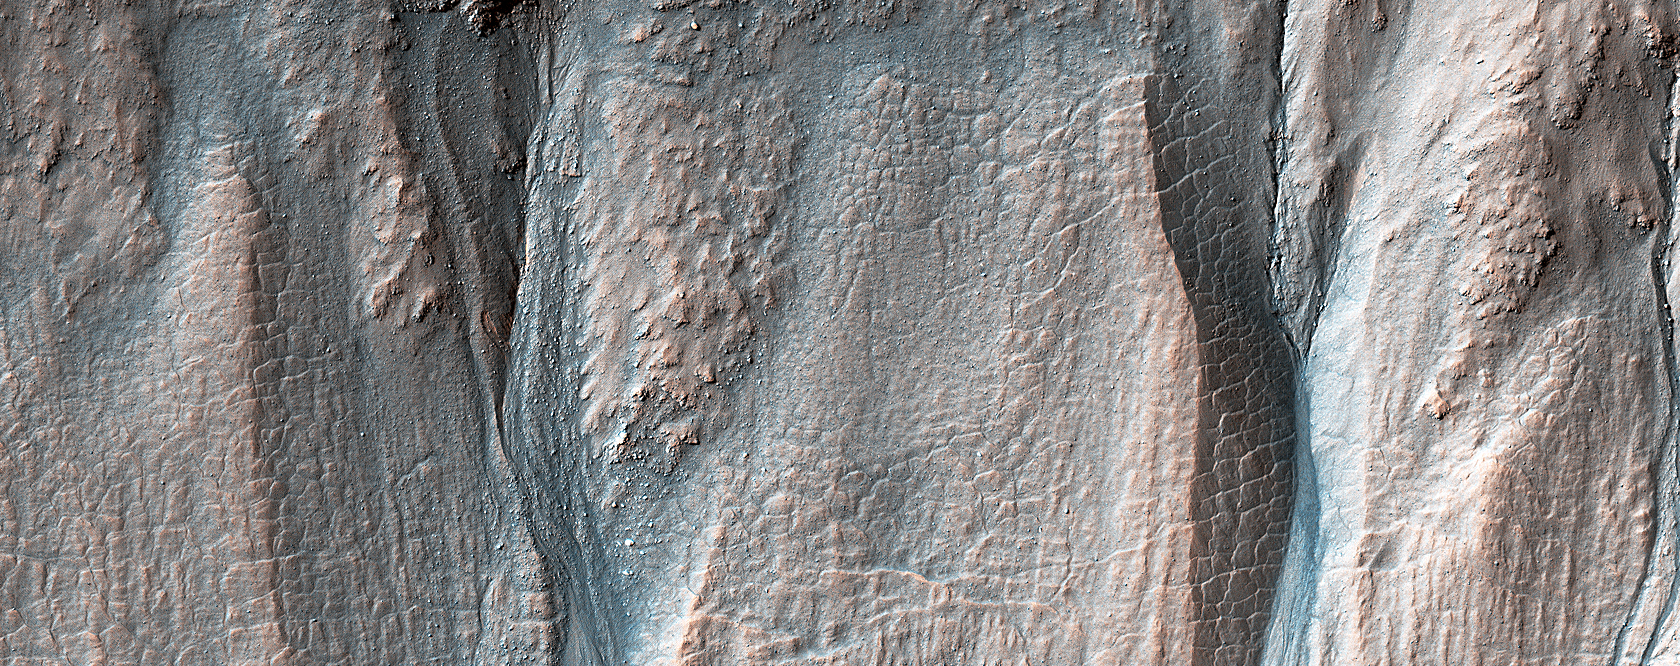 Crater Gullies at Multiple Elevations